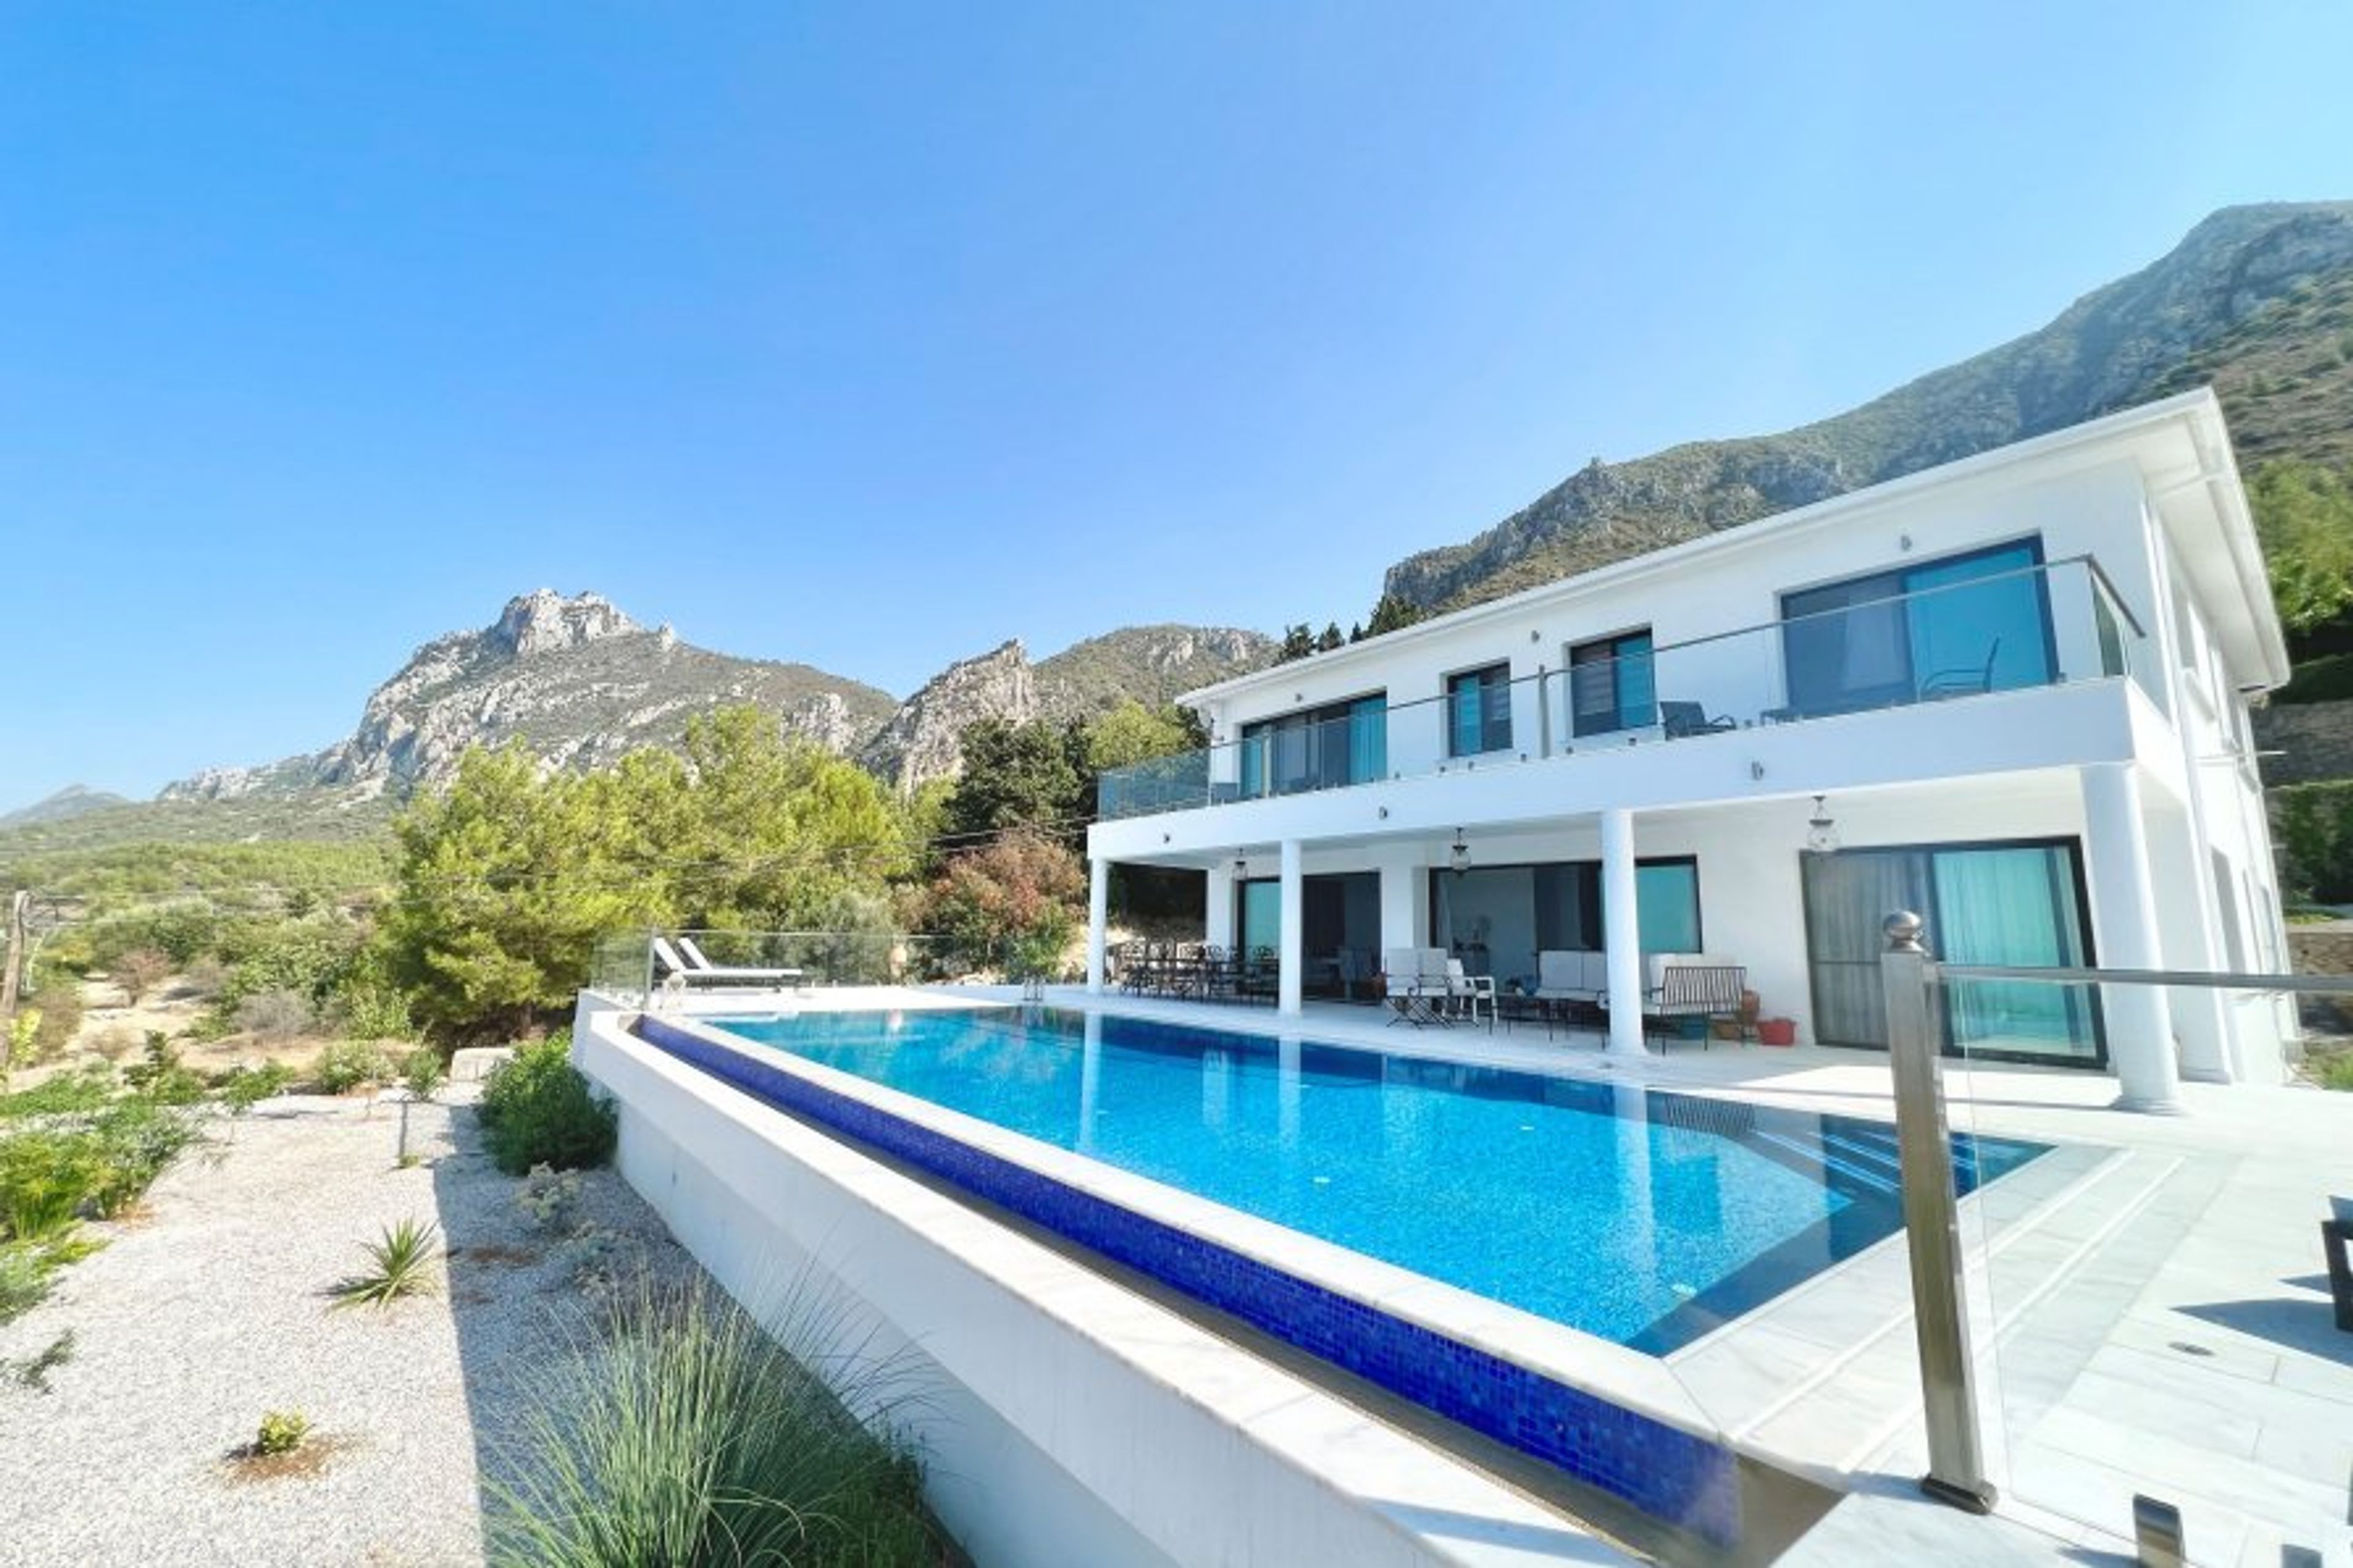 Villa with St Hilarion Castle and Mountains behind